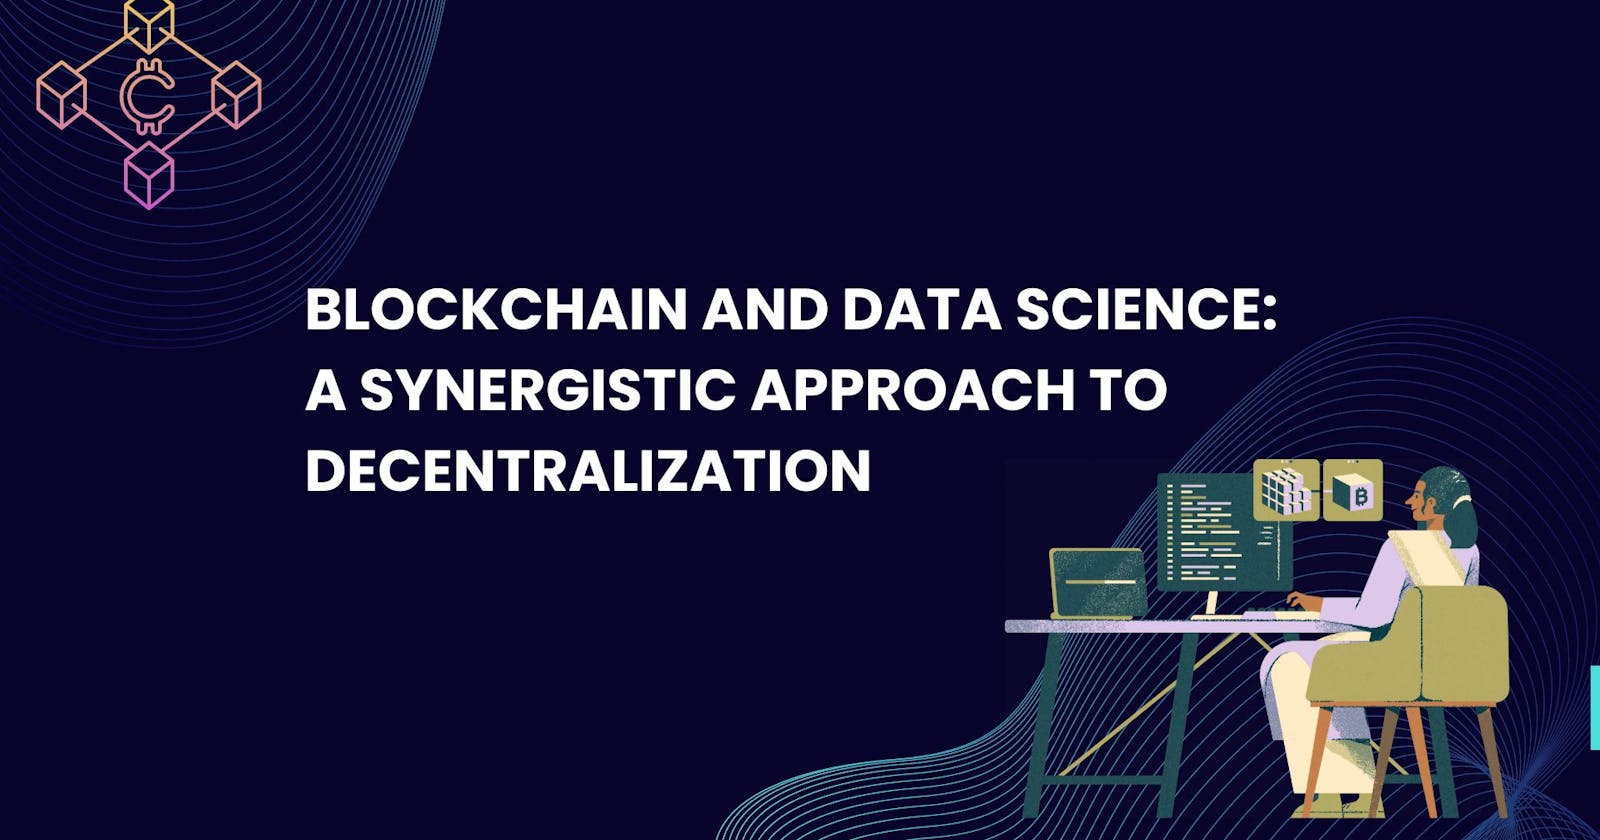 Blockchain and Data Science: A Synergistic Approach to Decentralization